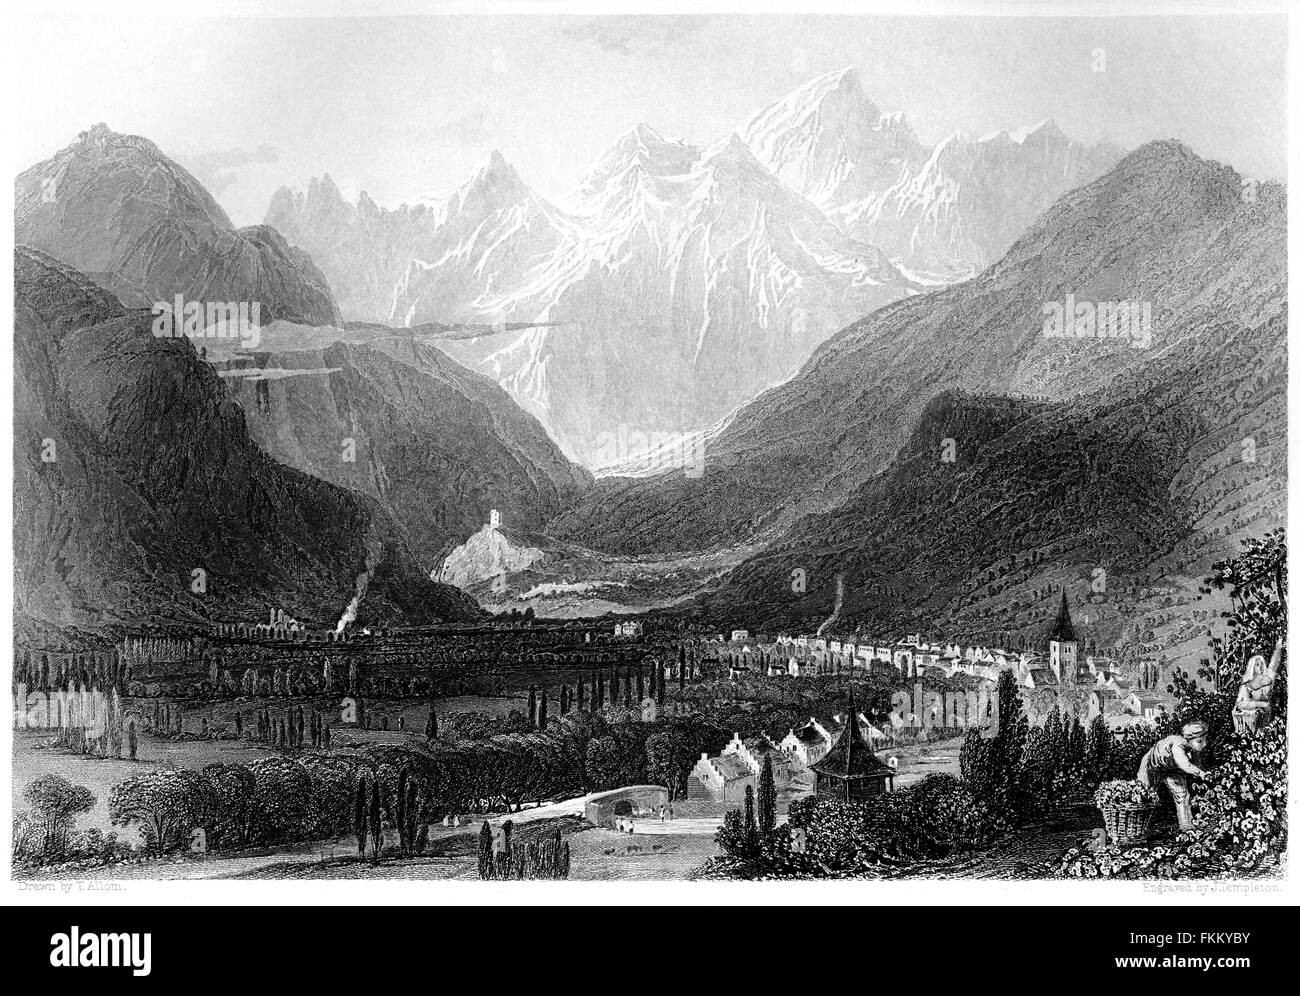 An engraving of Bagneres de Luchon, Pyrenees scanned at high resolution from a book printed in 1876. Believed copyright free. Stock Photo